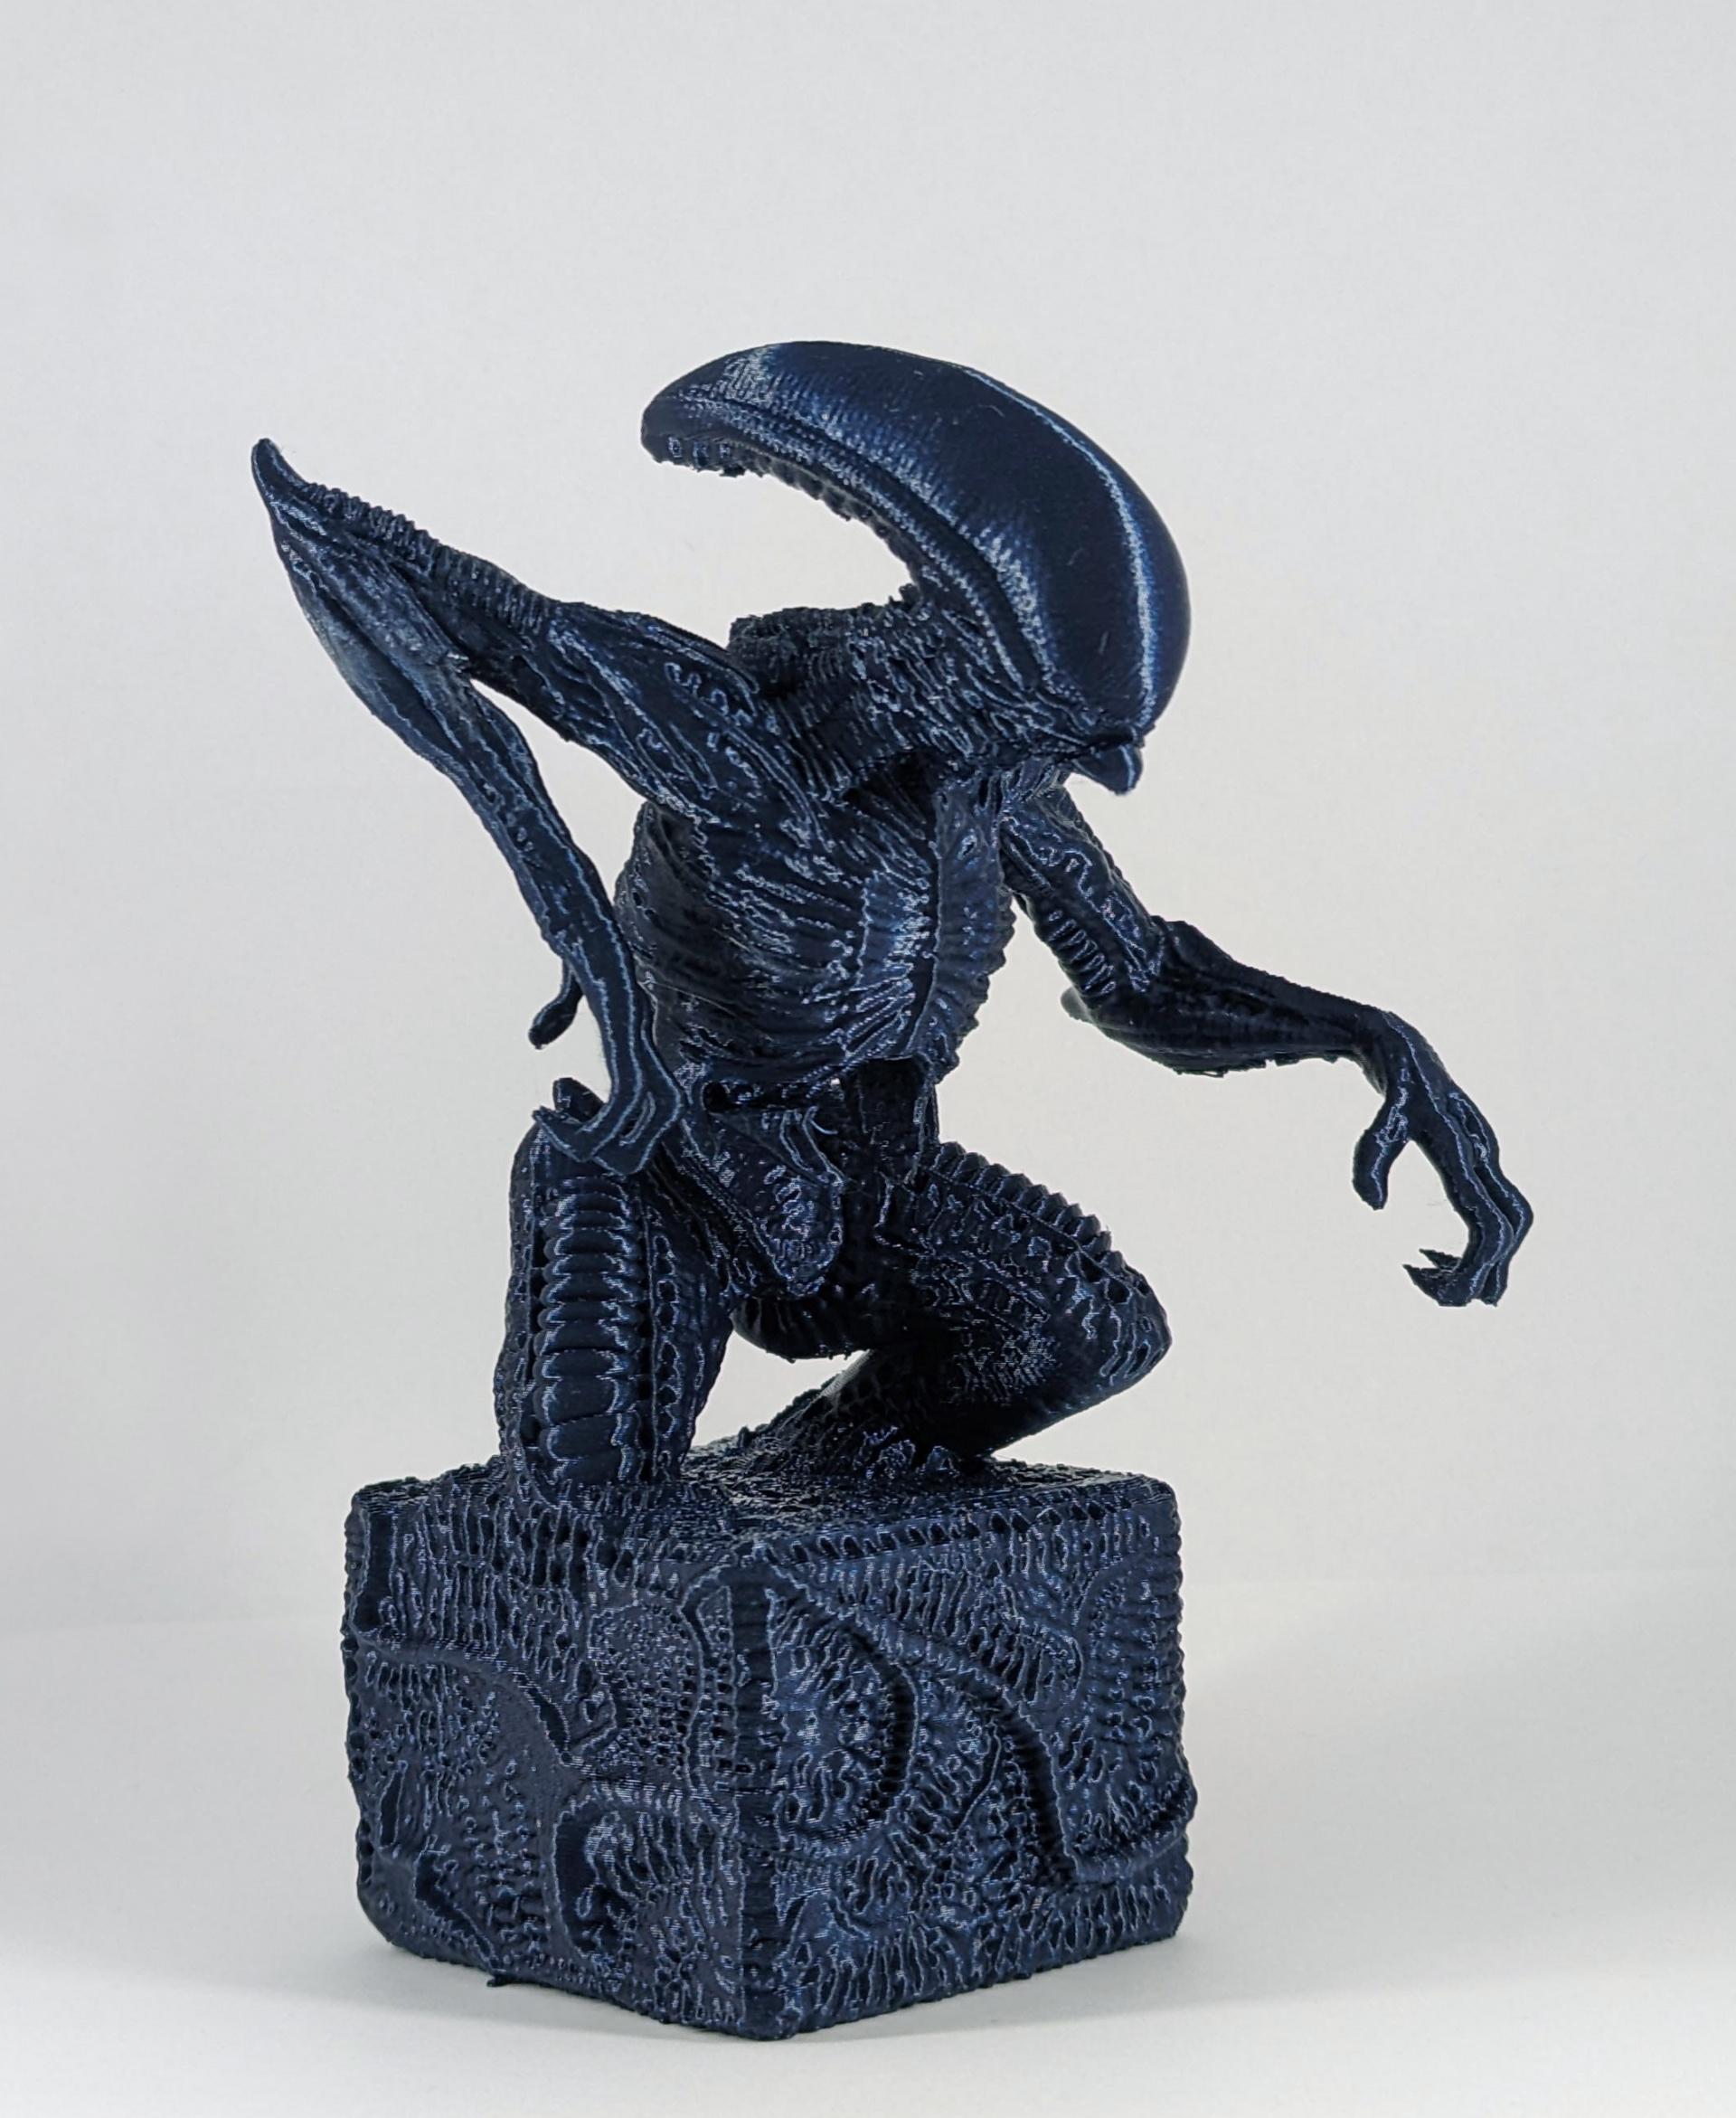 Alien Statuette - Awesome looking model from the Aliens universe. Polymaker PolyLite Dark Blue really brings out all the details and a nice shiny finish. - 3d model